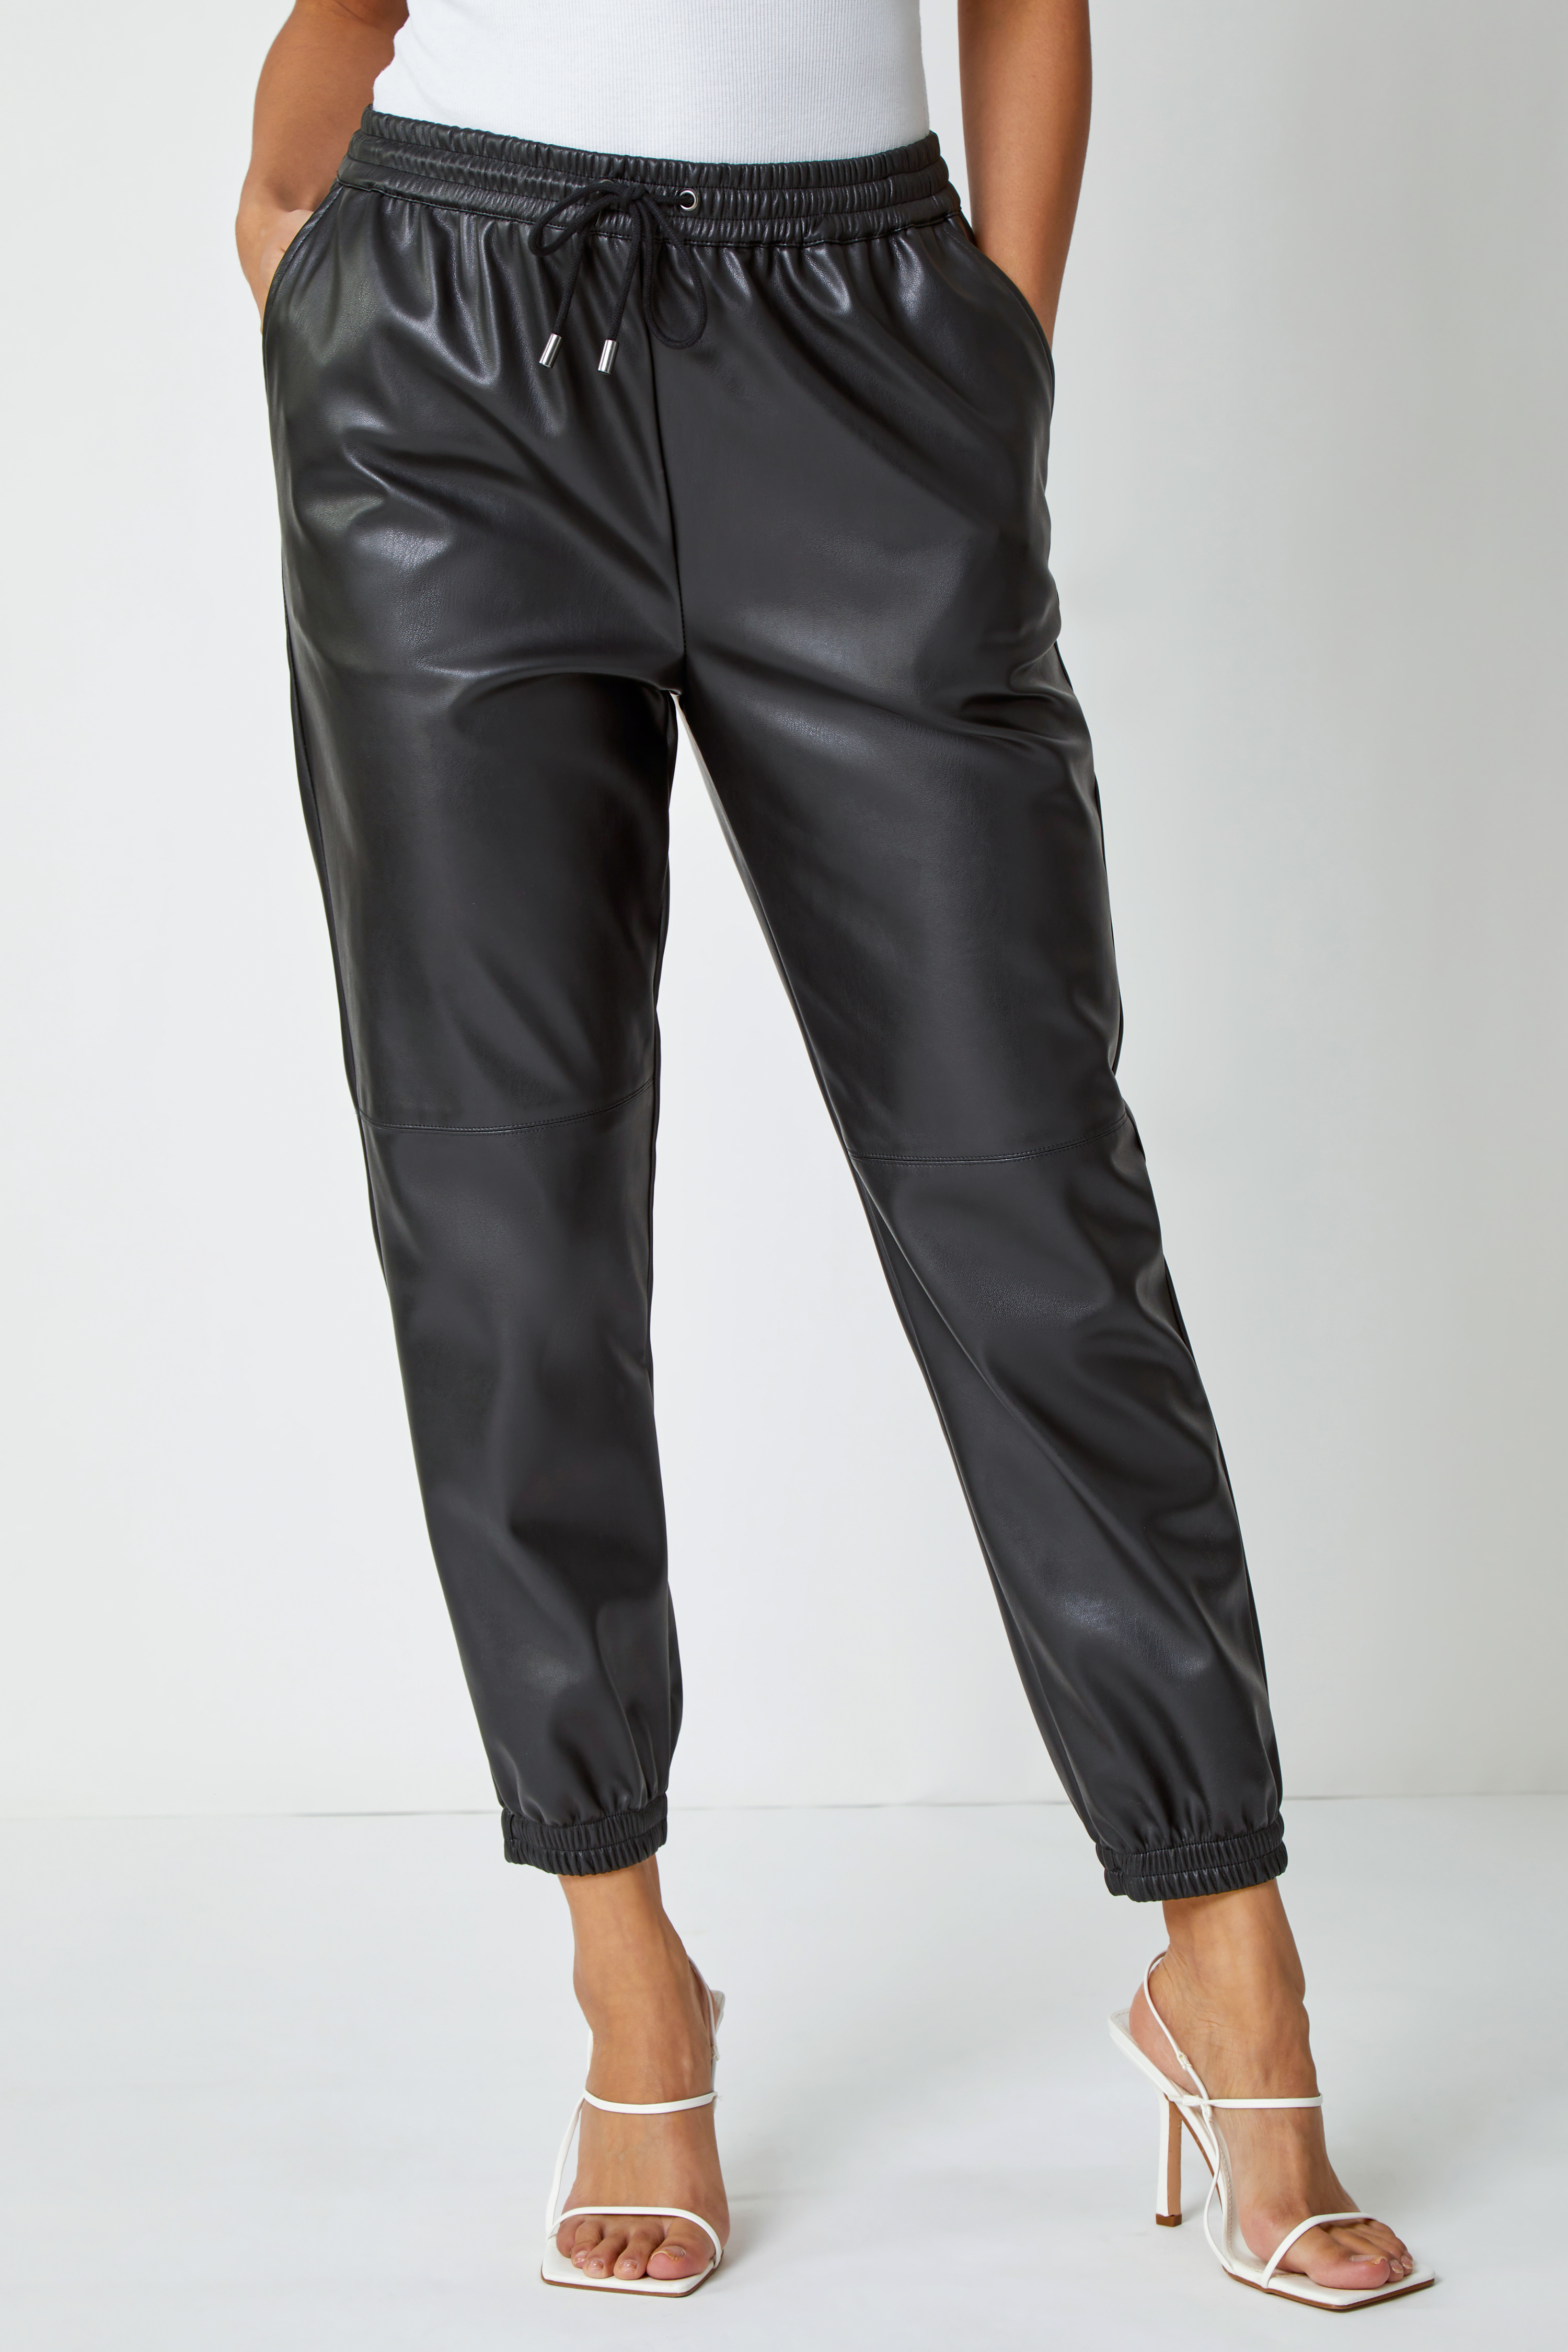 Black Faux Leather Cuffed Joggers , Image 2 of 5